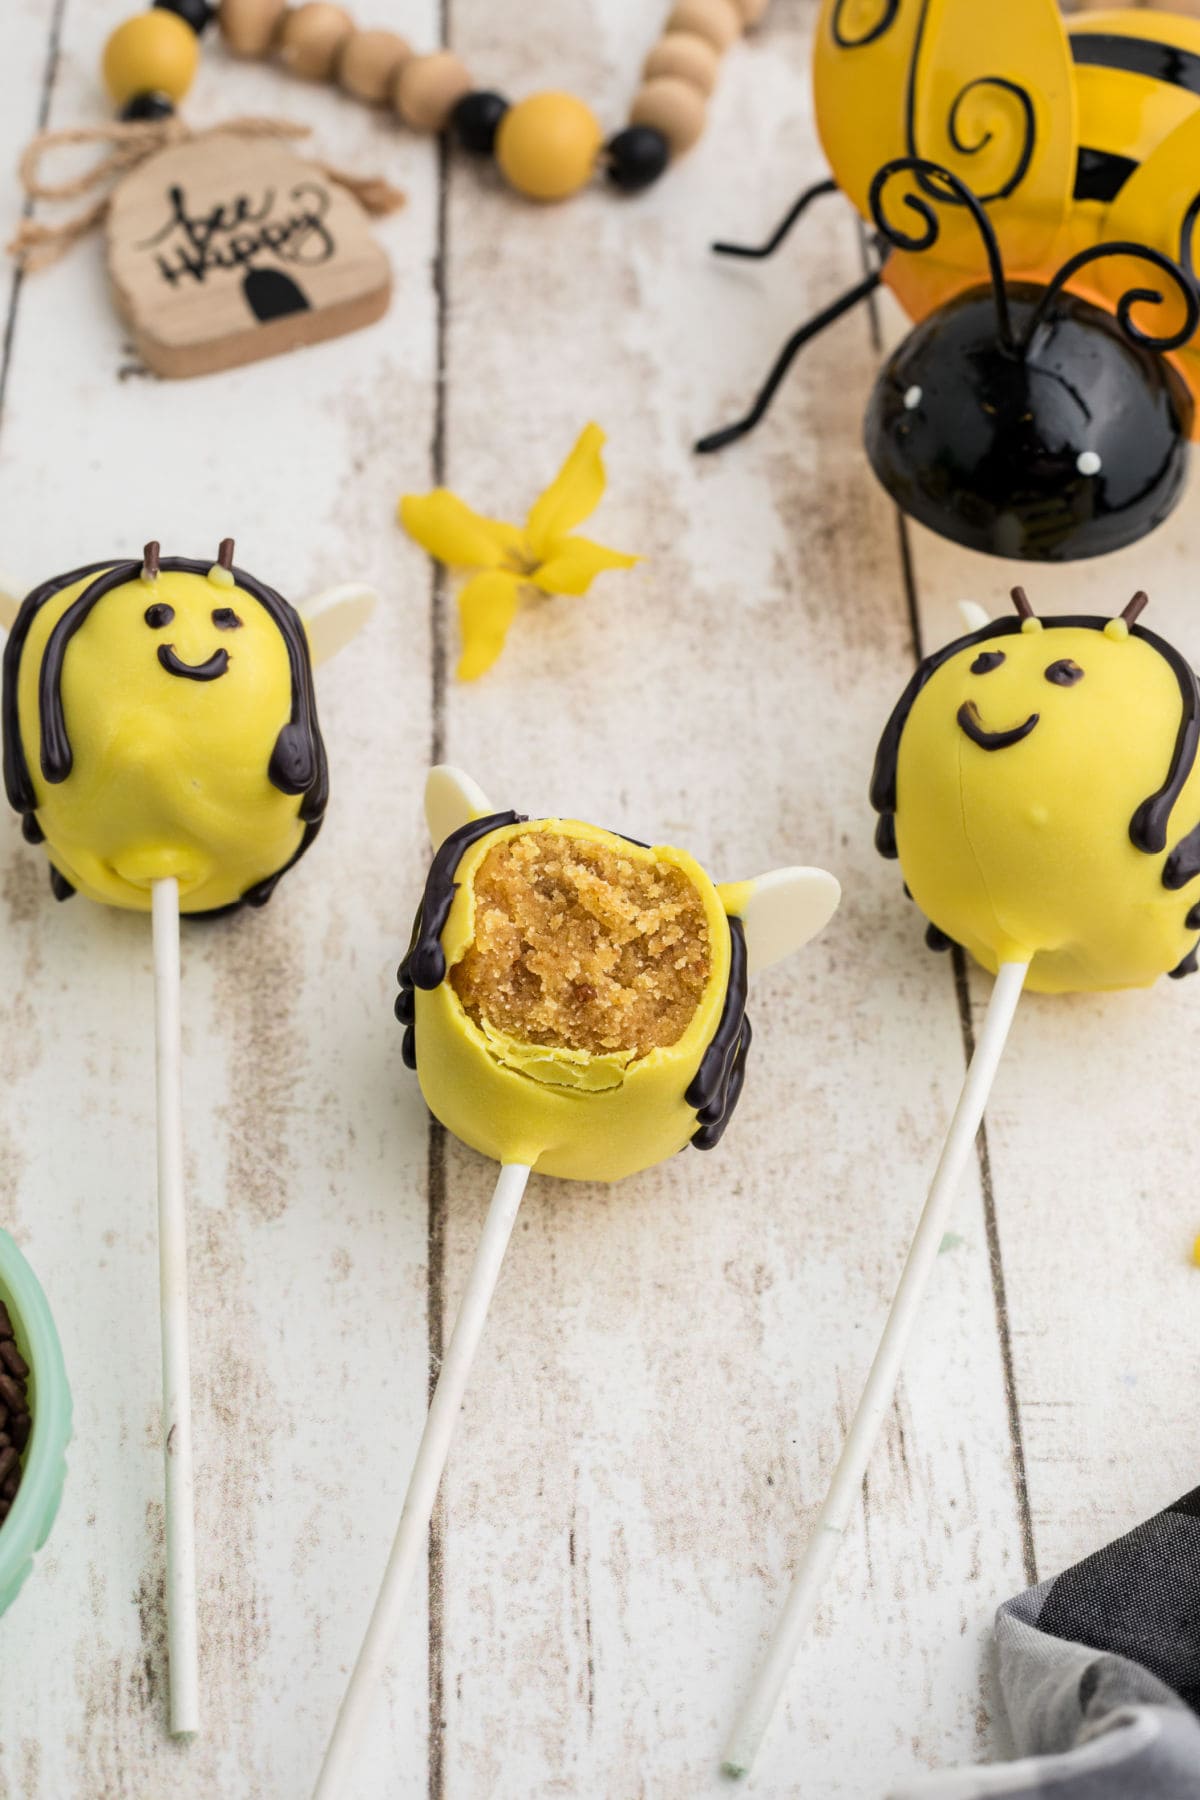 Several bumble bee cake pops on a table with a bite taken out of one.